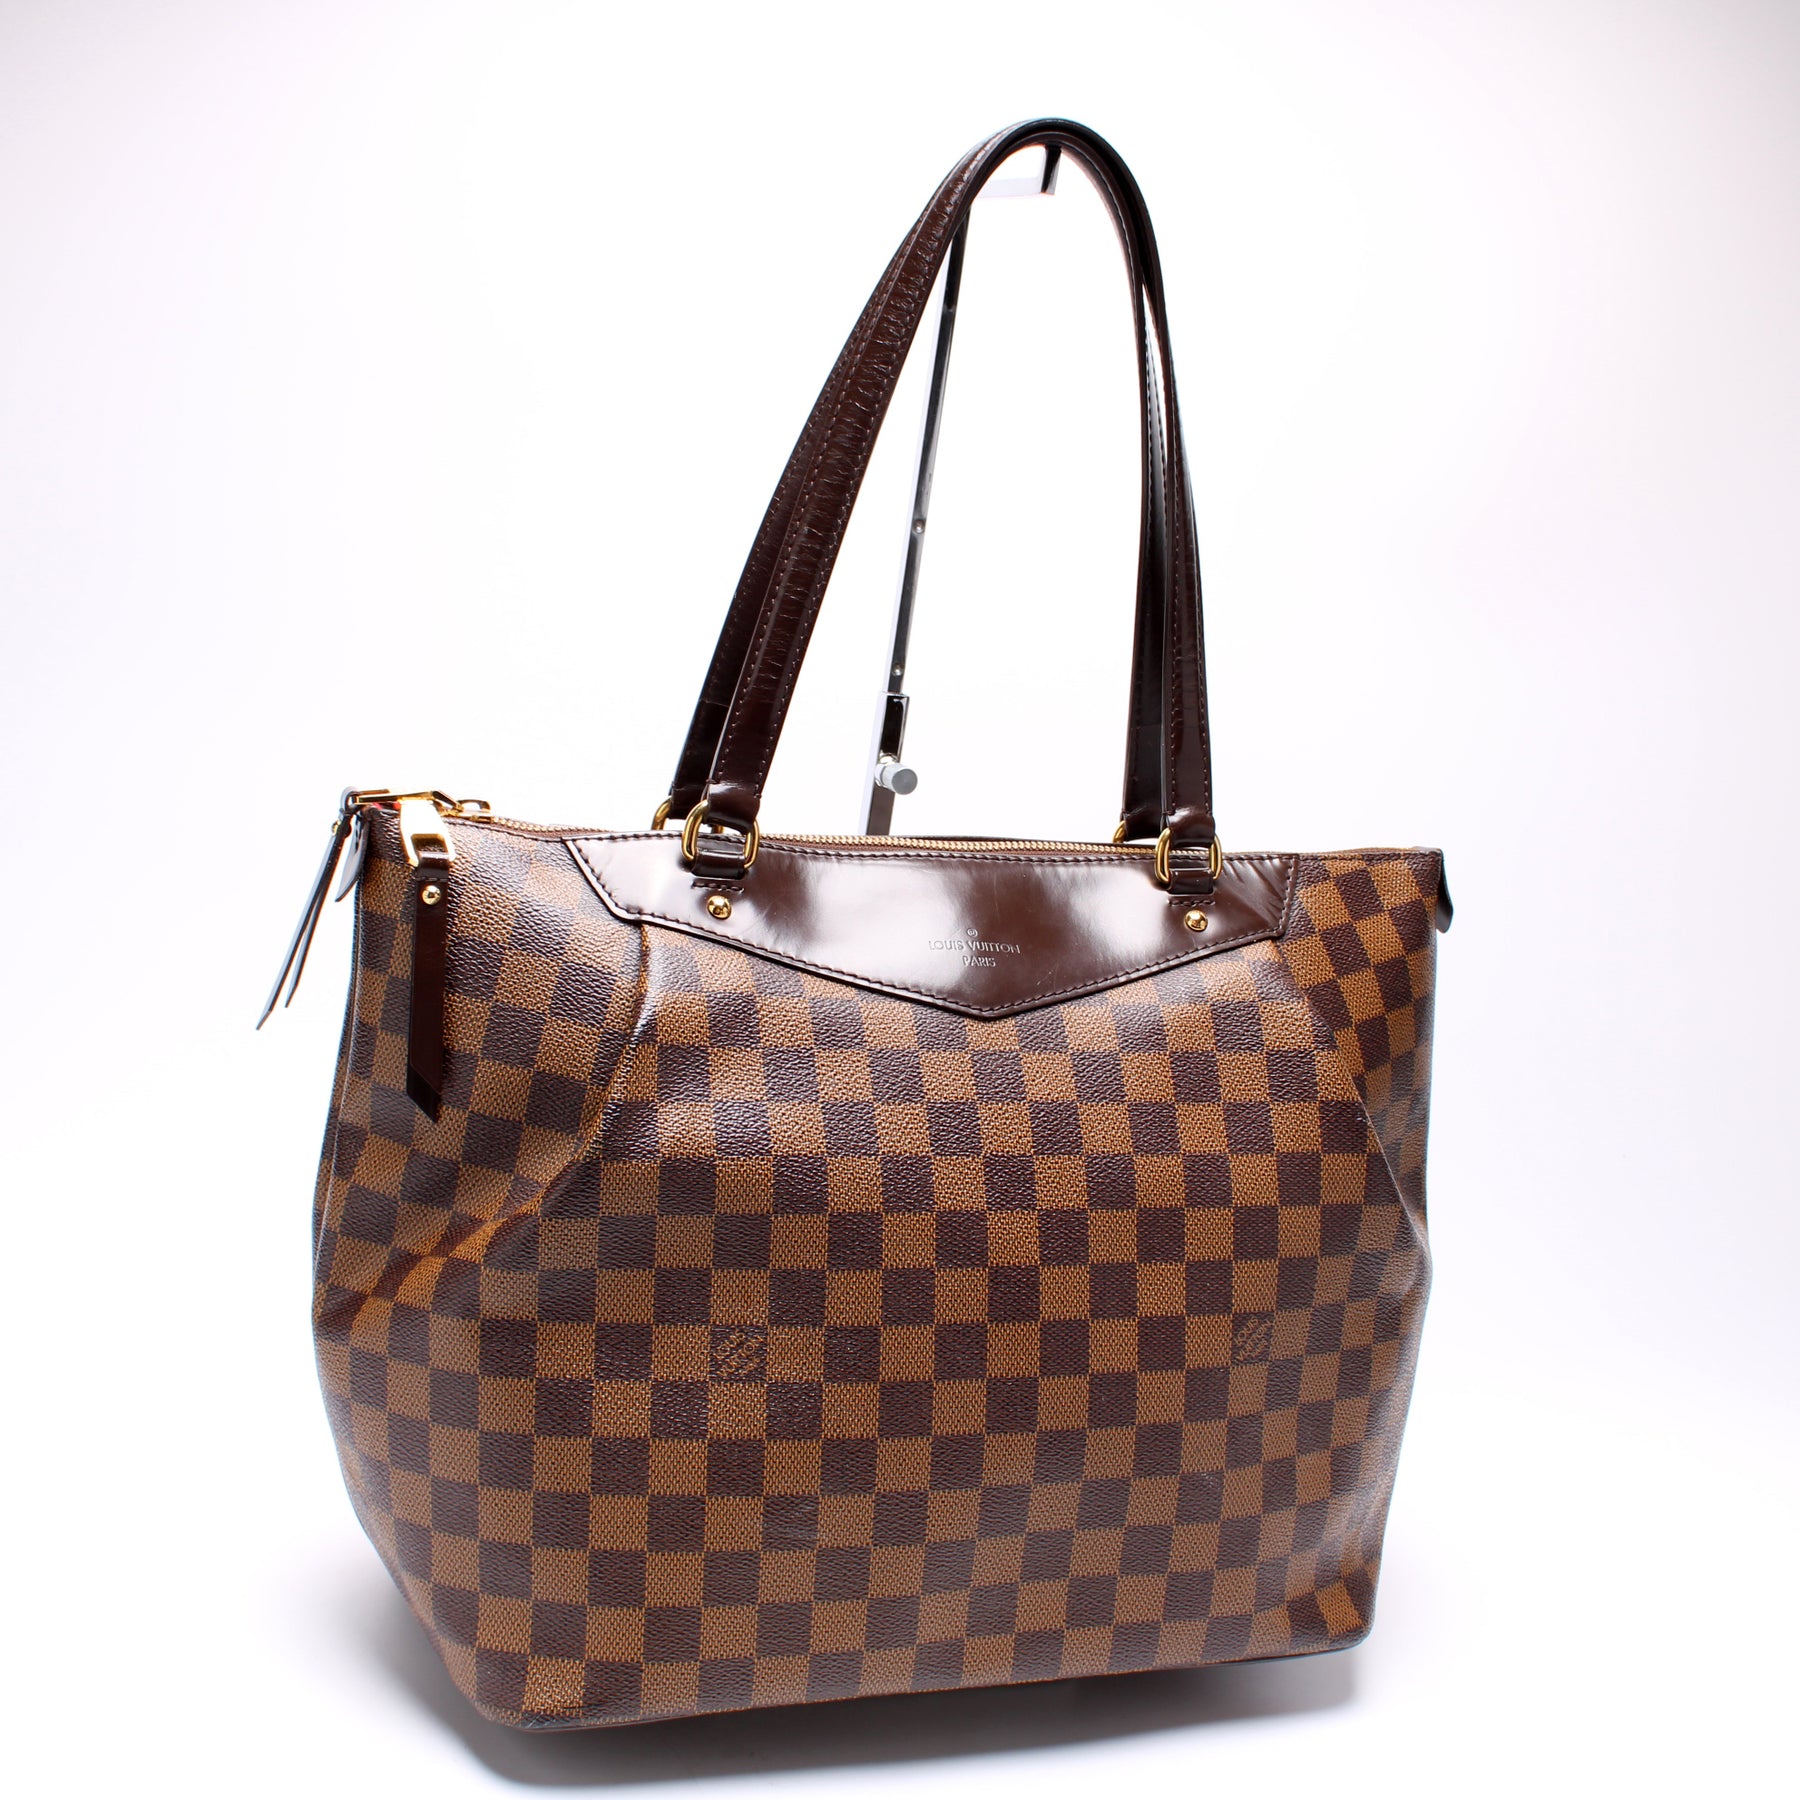 Authenticated Used LOUIS VUITTON Louis Vuitton Damier Westminster